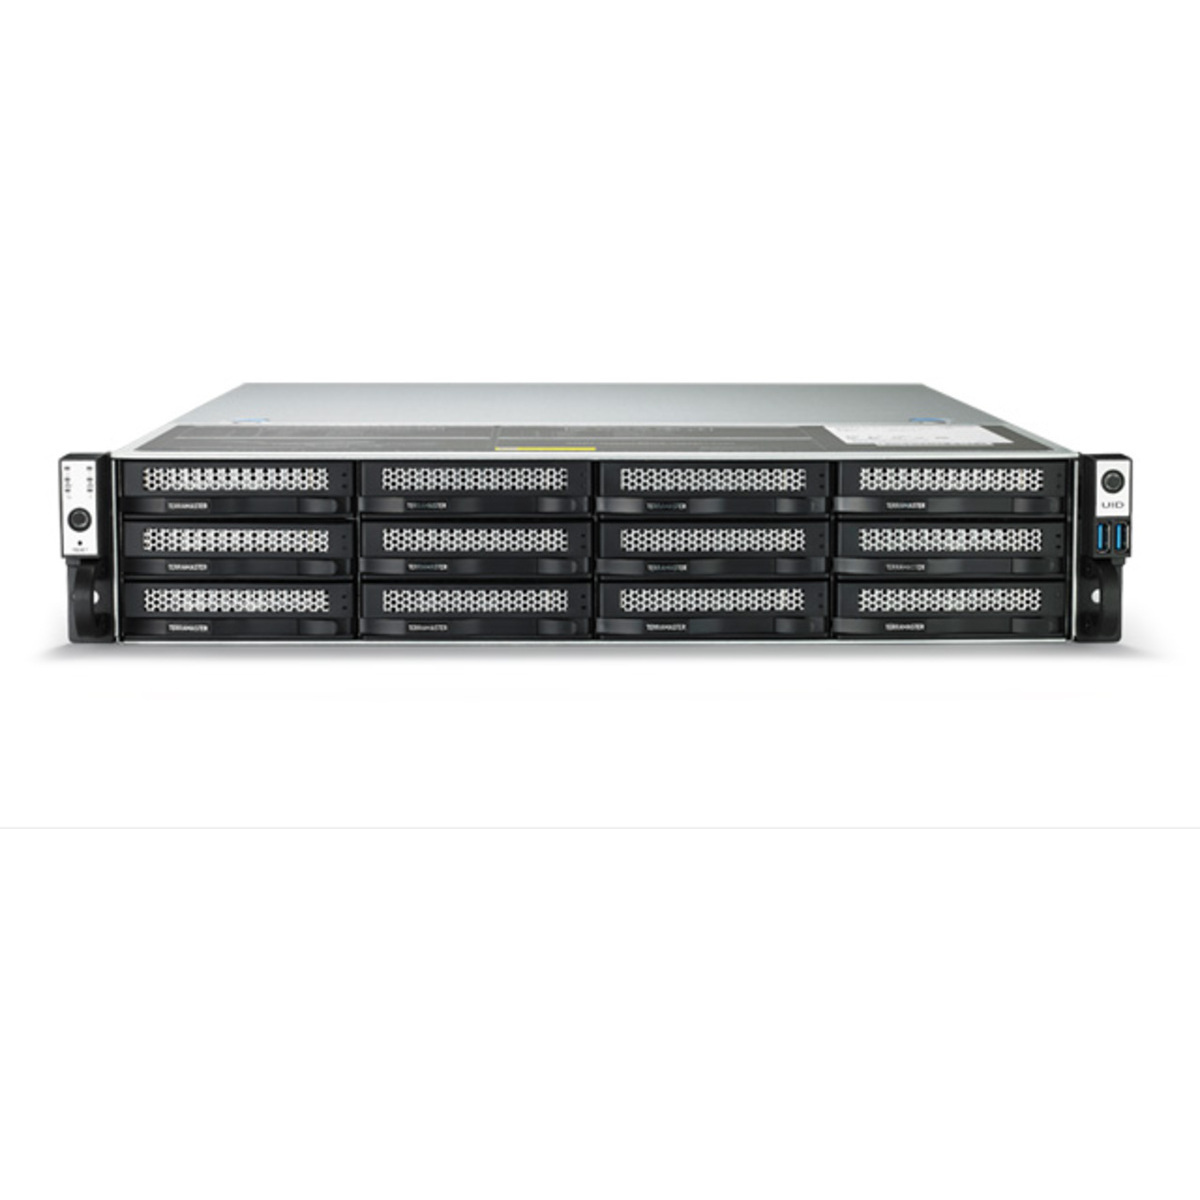 TerraMaster U12-722-2224 3.5tb 12-Bay RackMount Large Business / Enterprise NAS - Network Attached Storage Device 7x500gb Western Digital Red SA500 WDS500G1R0A 2.5 560/530MB/s SATA 6Gb/s SSD NAS Class Drives Installed - Burn-In Tested U12-722-2224